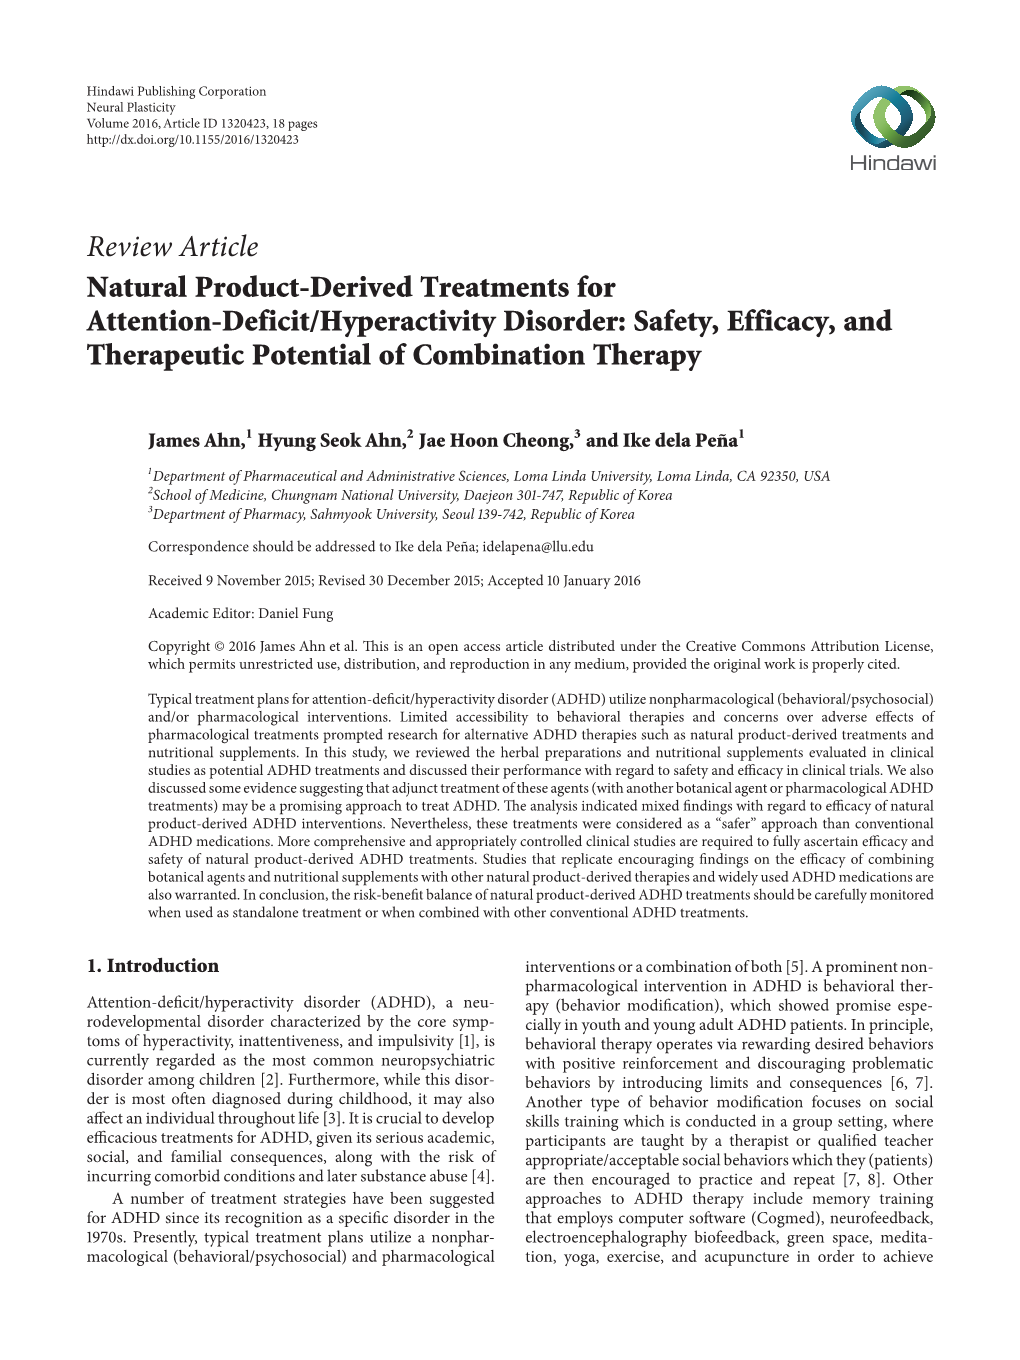 Review Article Natural Product-Derived Treatments for Attention-Deficit/Hyperactivity Disorder: Safety, Efficacy, and Therapeutic Potential of Combination Therapy